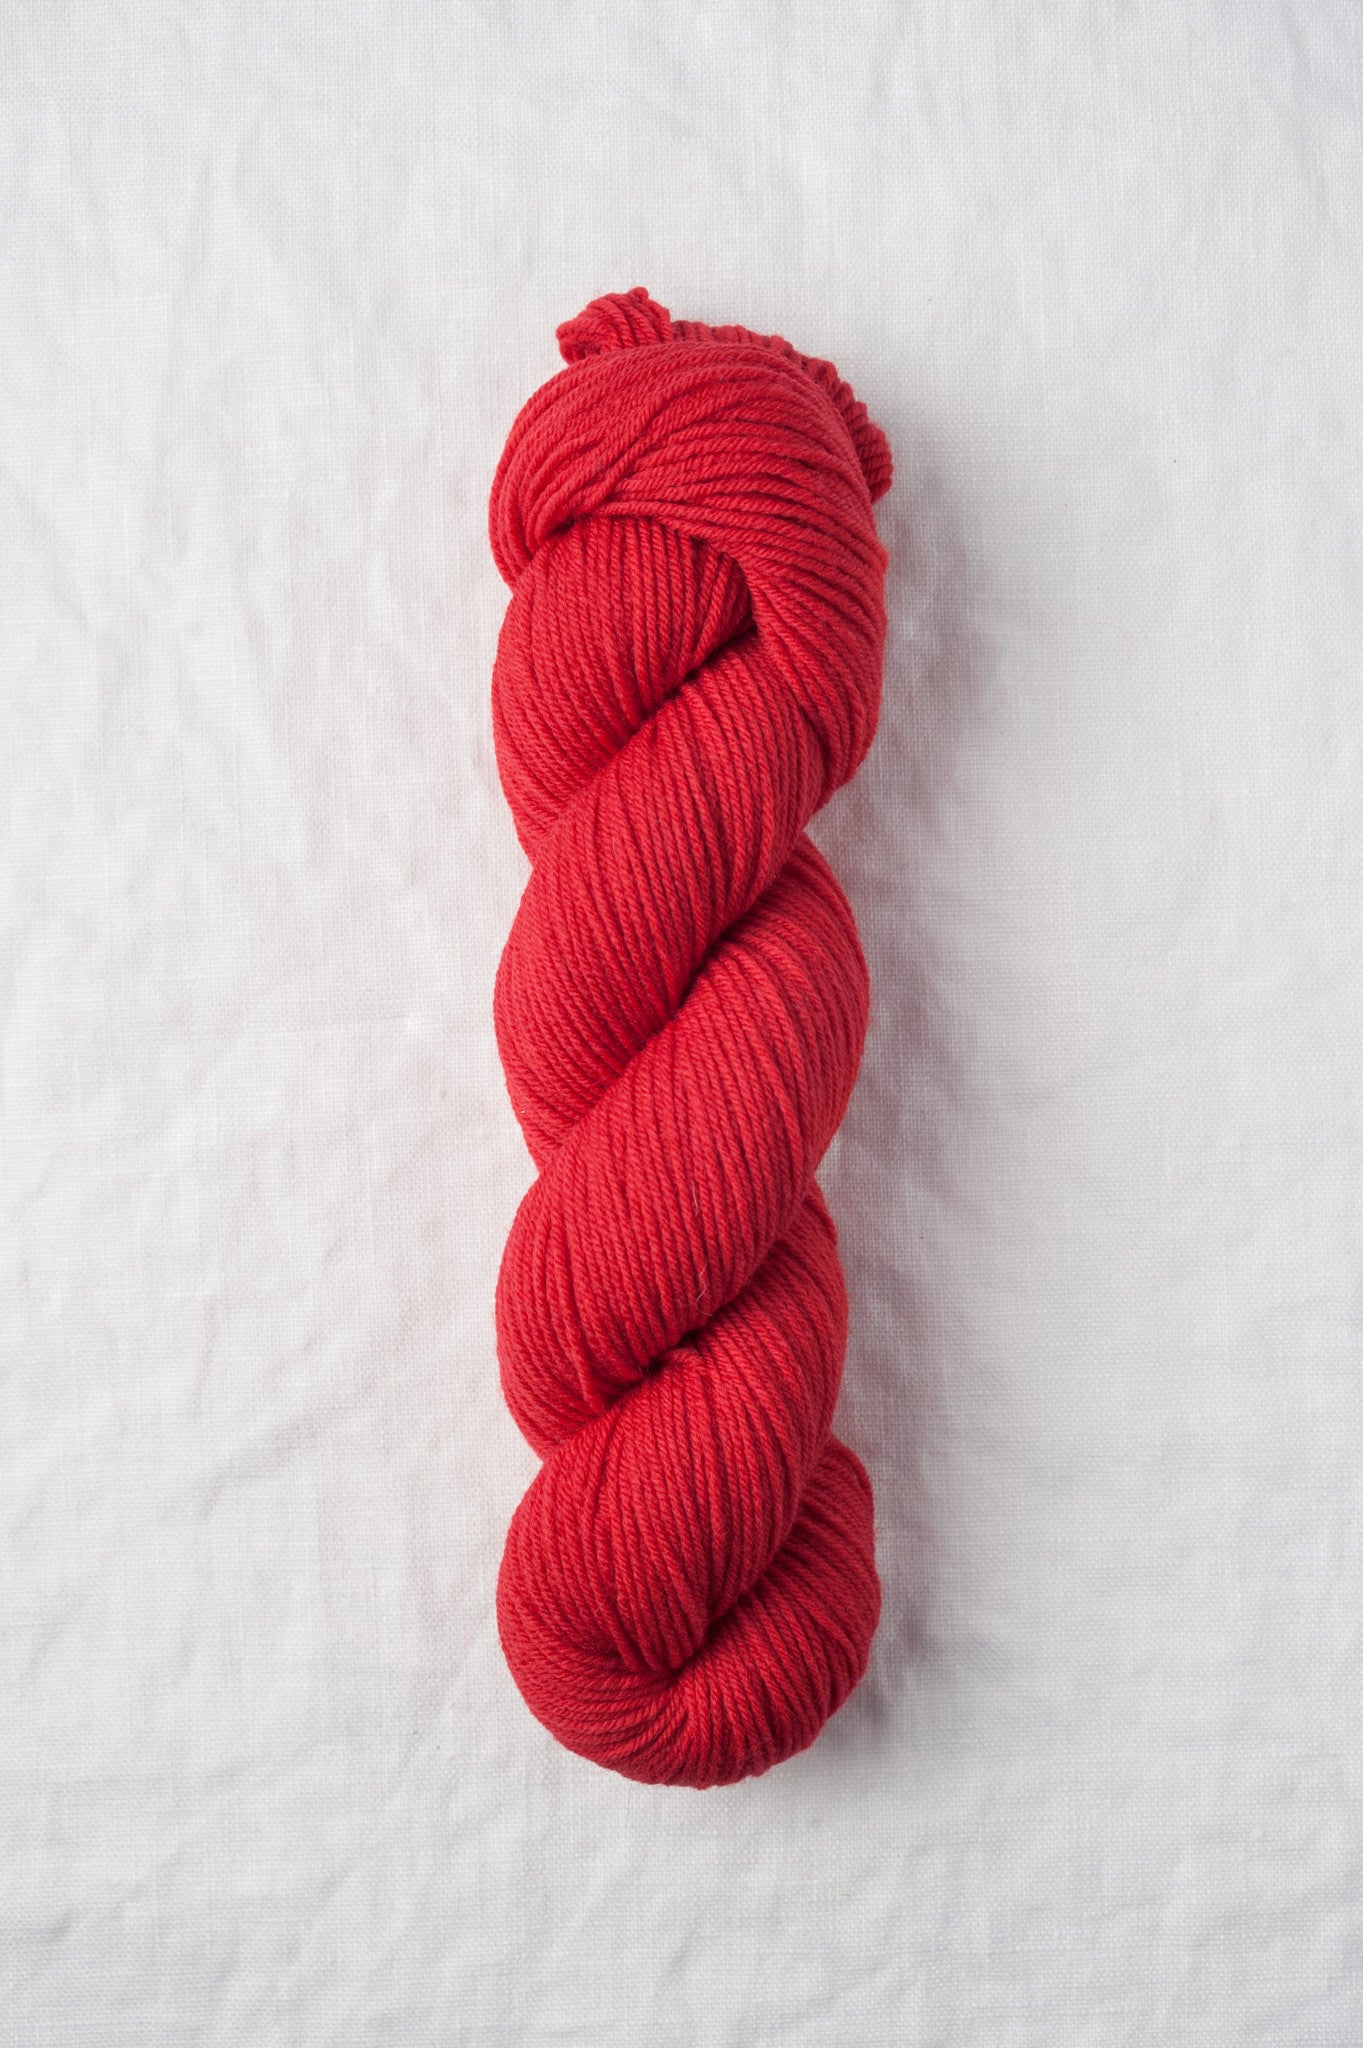 Finch Wool Yarn, Fingering Weight – Quince & Co.